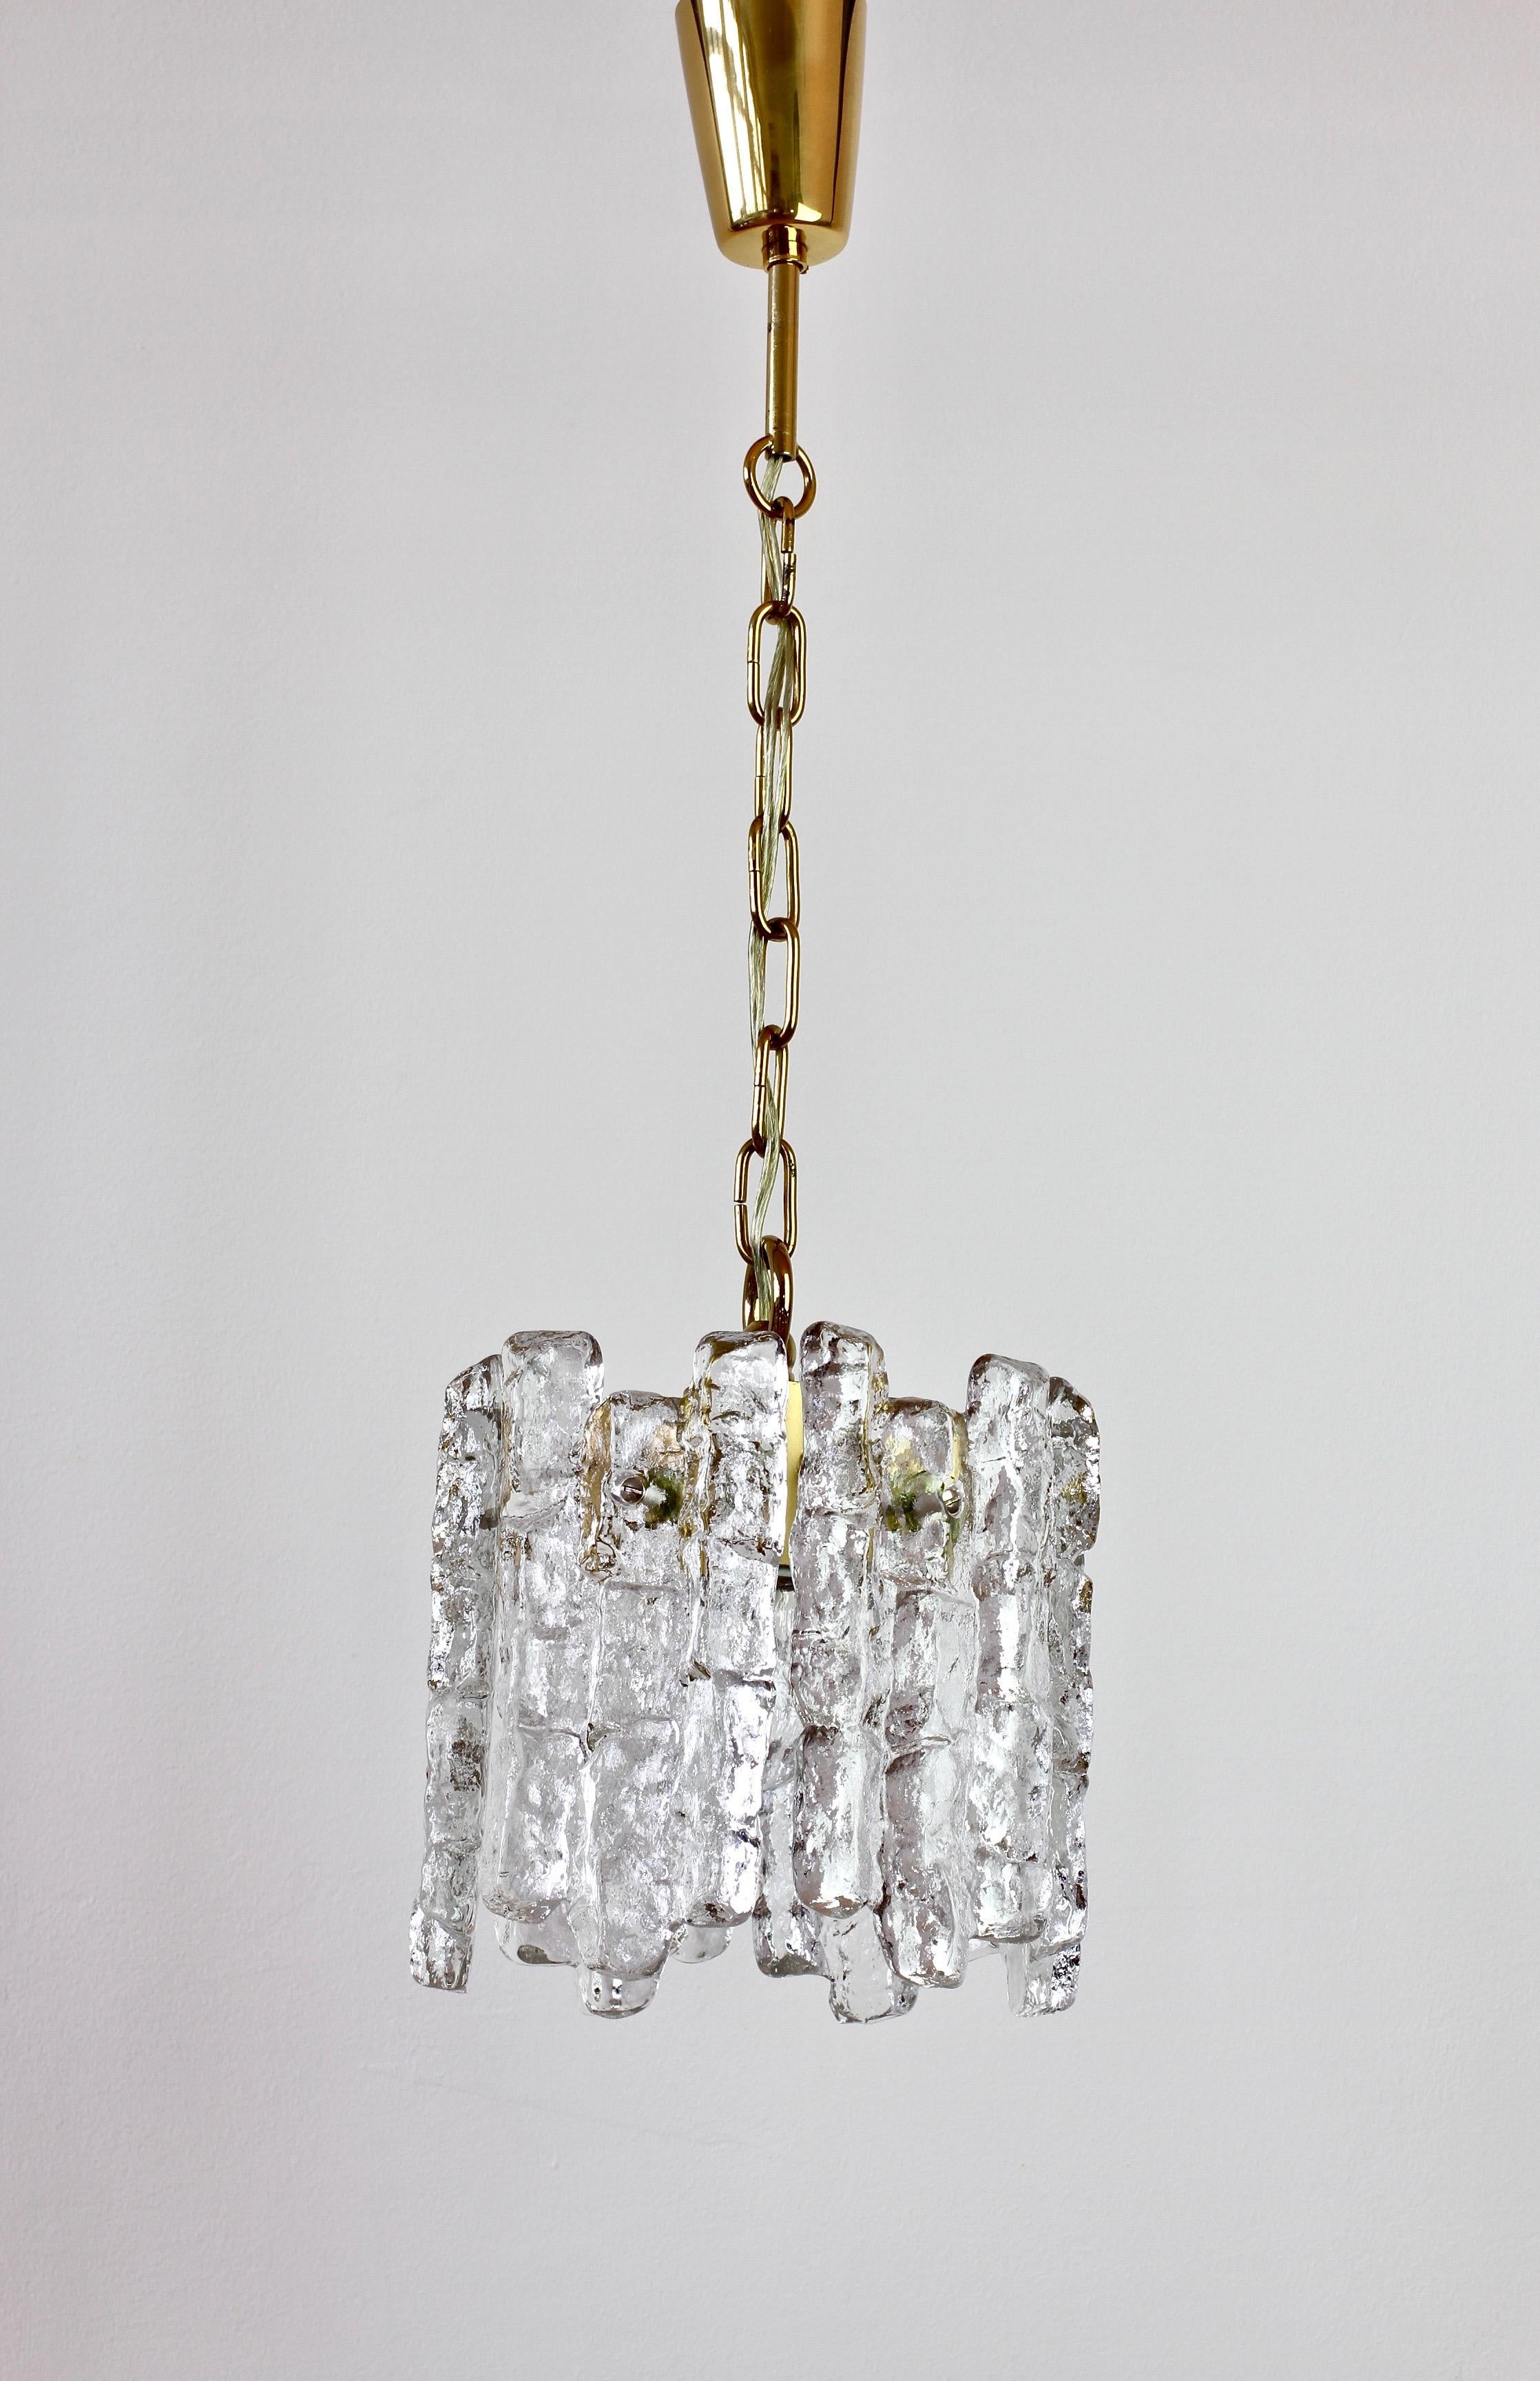 Molded Mid-Century Kalmar Ice Crystal Glass and Brass Pendant Light or Chandelier 1960s